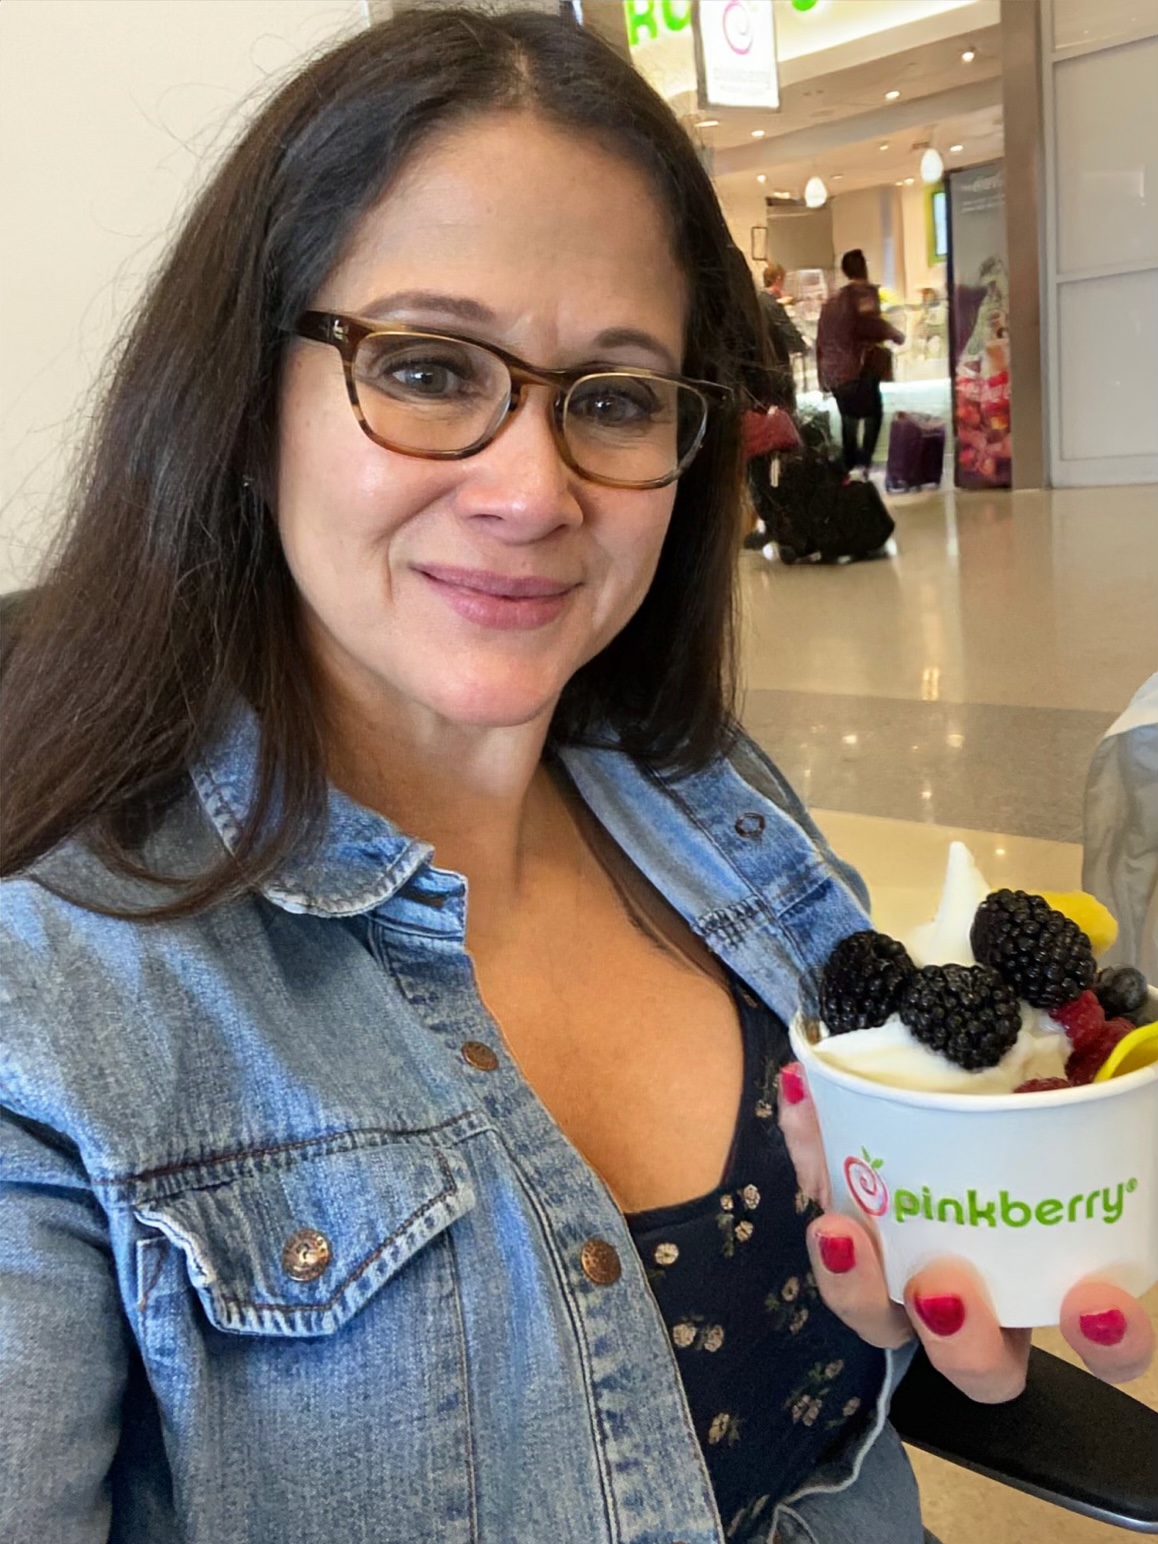 Tw Pornstars Hot Wife Rio Rio Blaze Twitter Pinkberry Is My Favorite Place To Get Froyo 💕